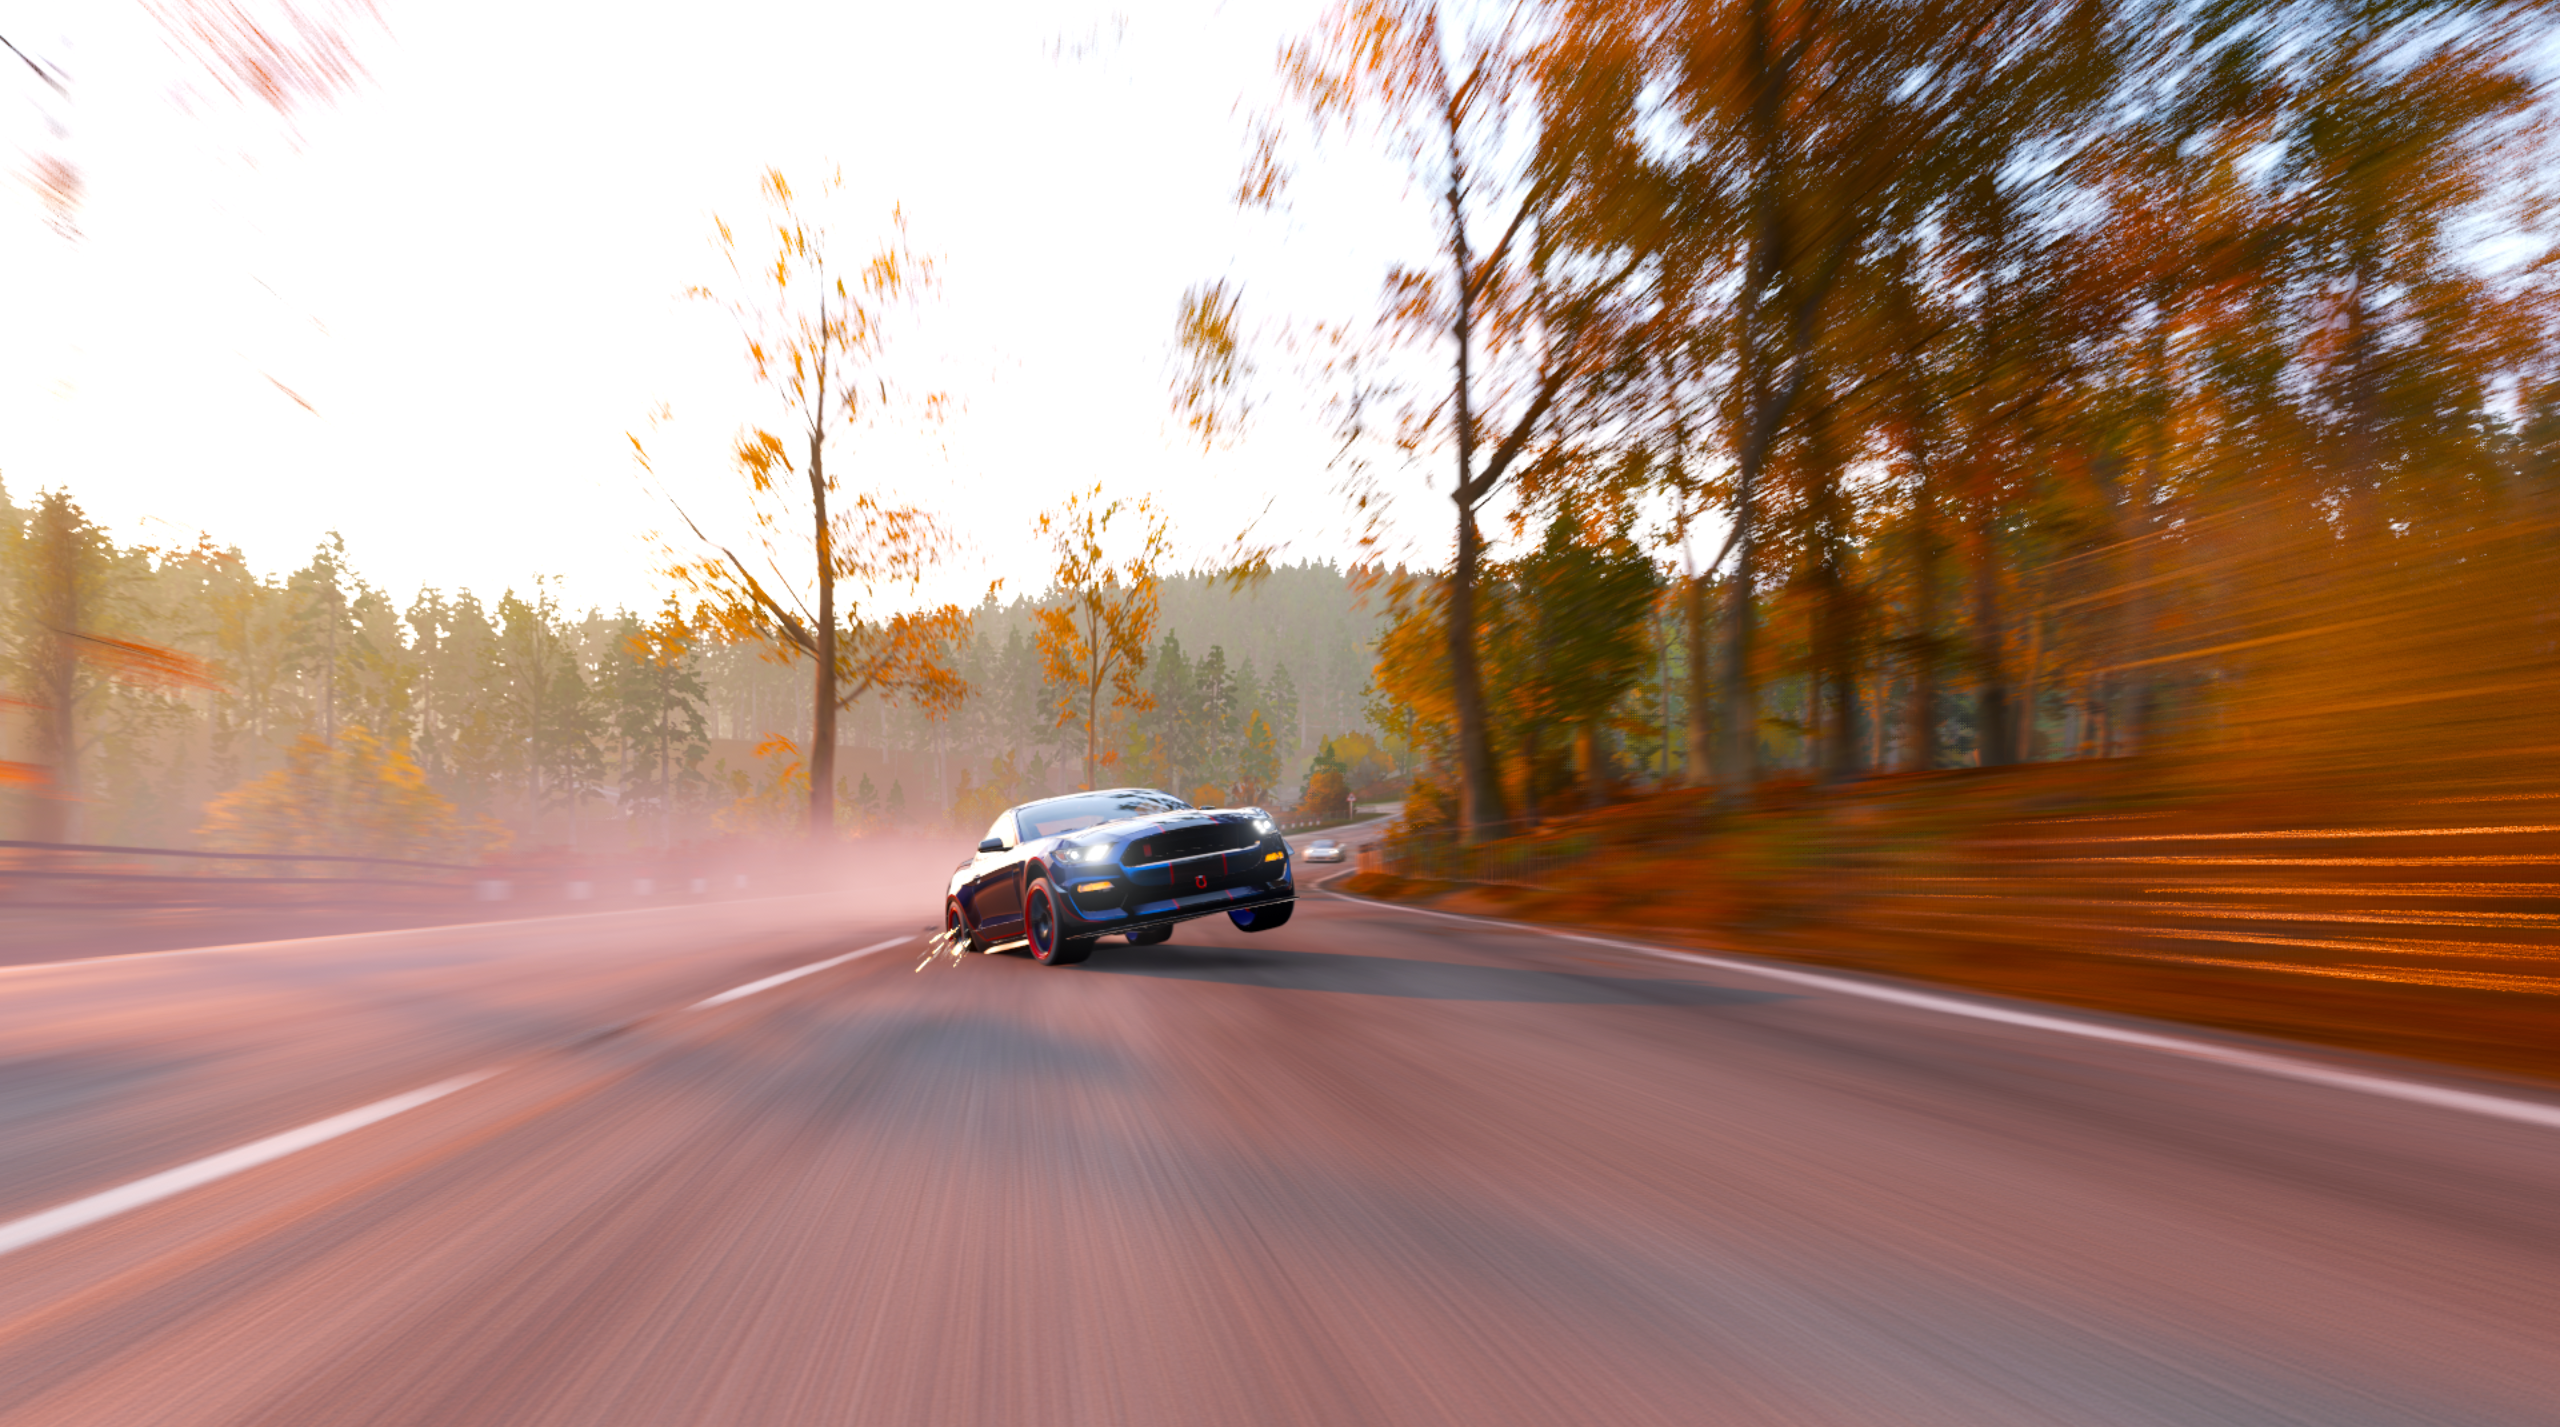 Autumn Boar Spark Speed Limit Car High View LED Headlight Sinking Red Trees Highway Fly Frontal View 2560x1427